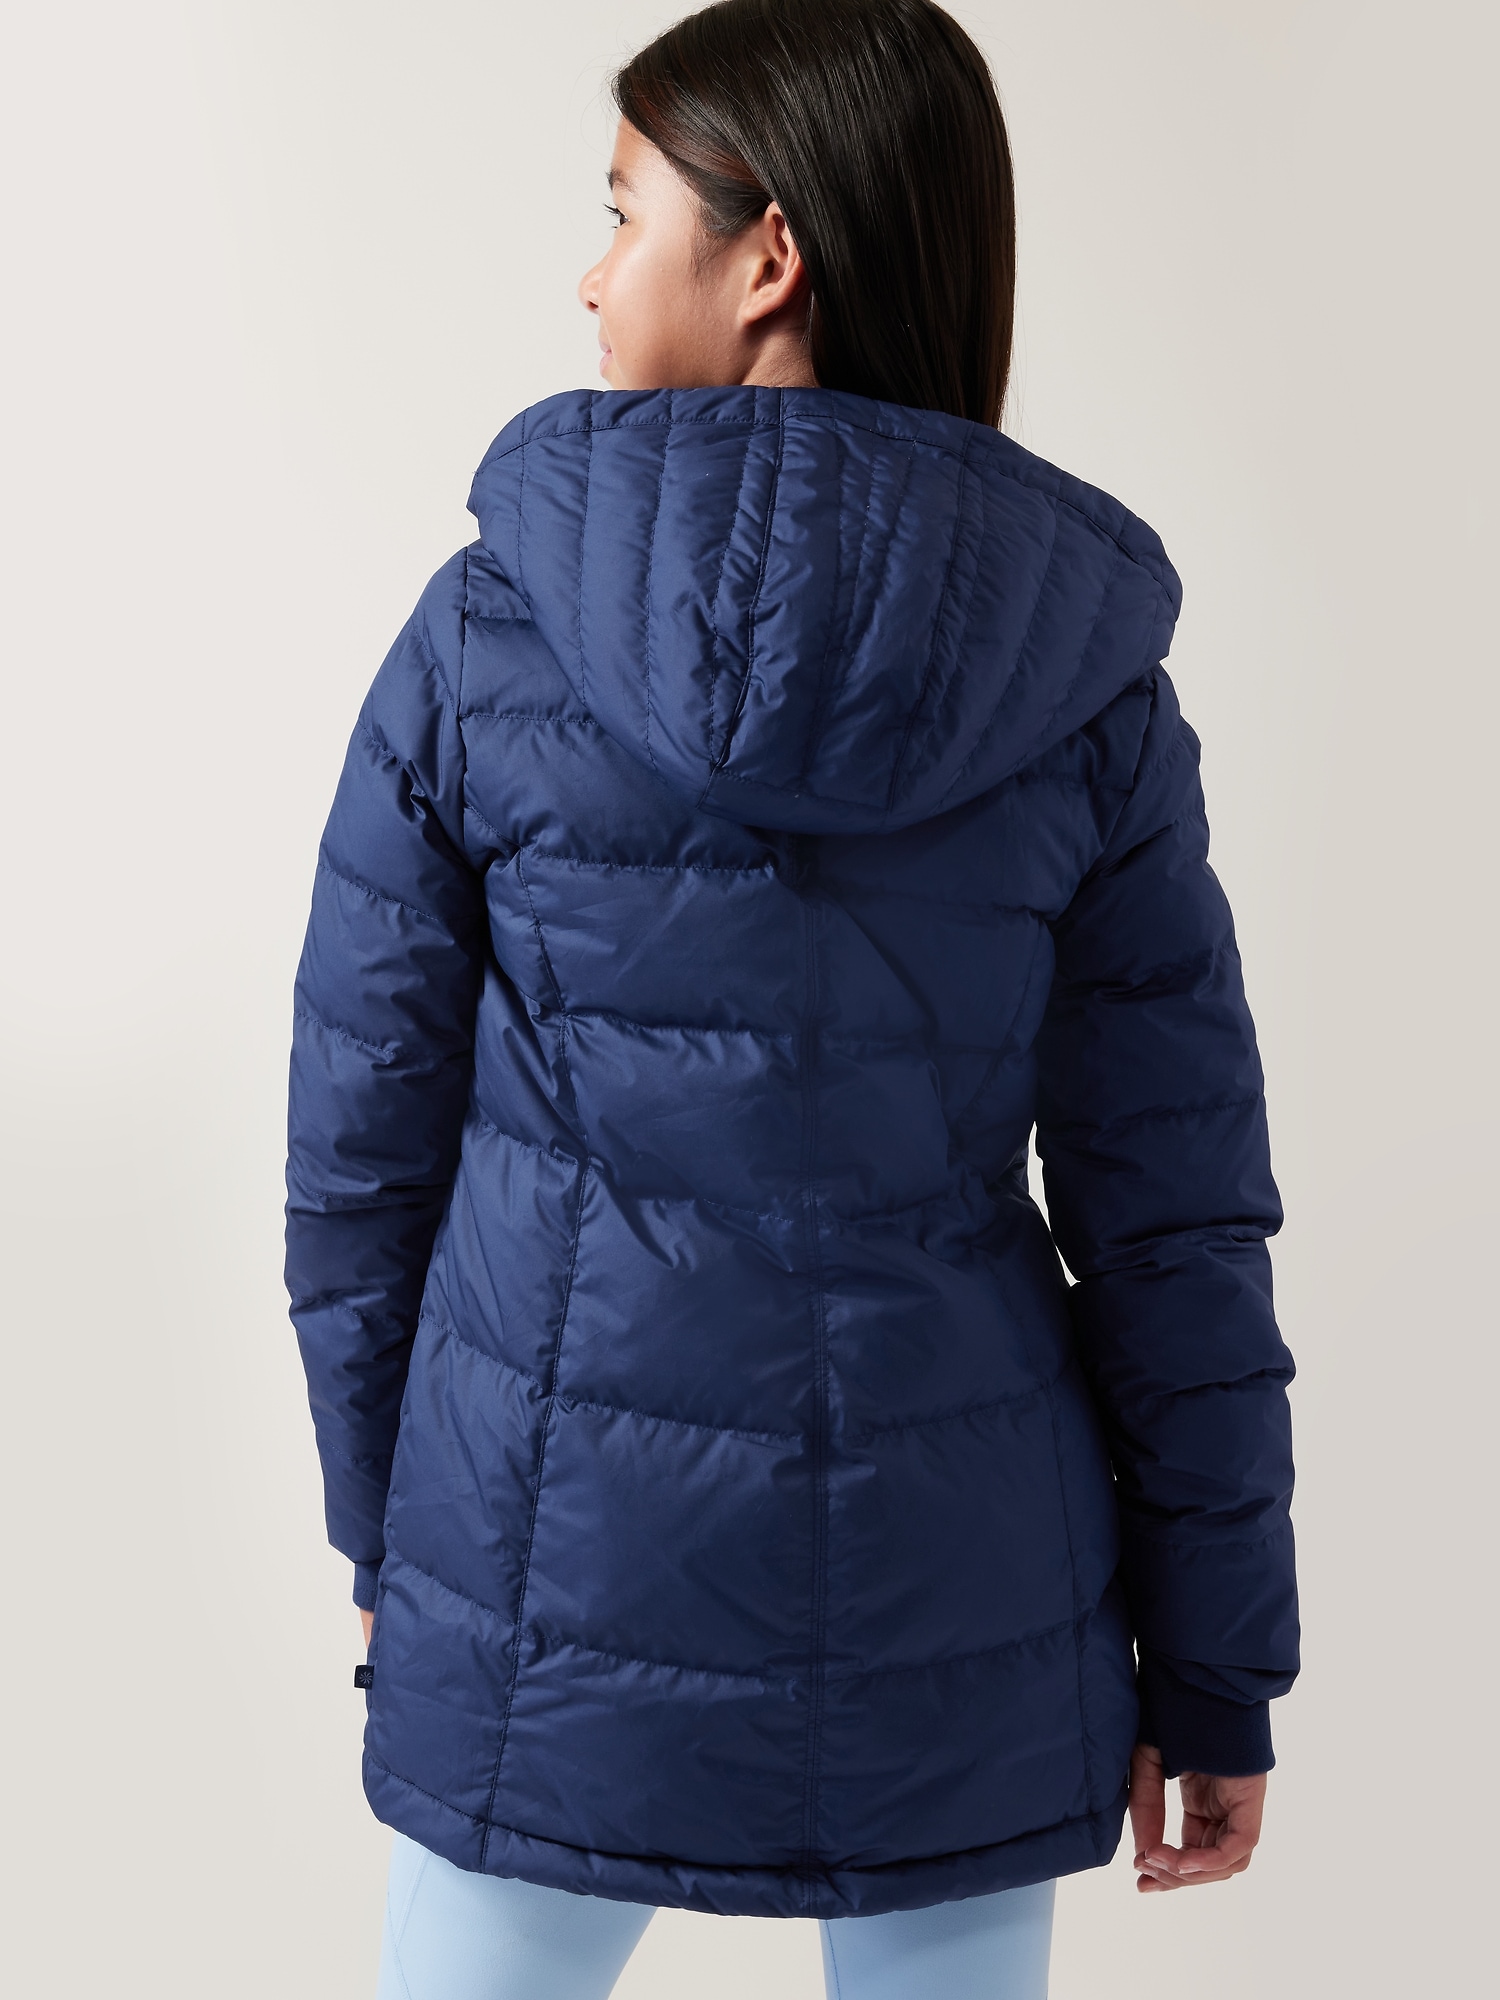 Fashionable Jacket For Girls Jacket For Women's Latest Solid Color Stylish  Long Jacket/Women's Quilted Jacket